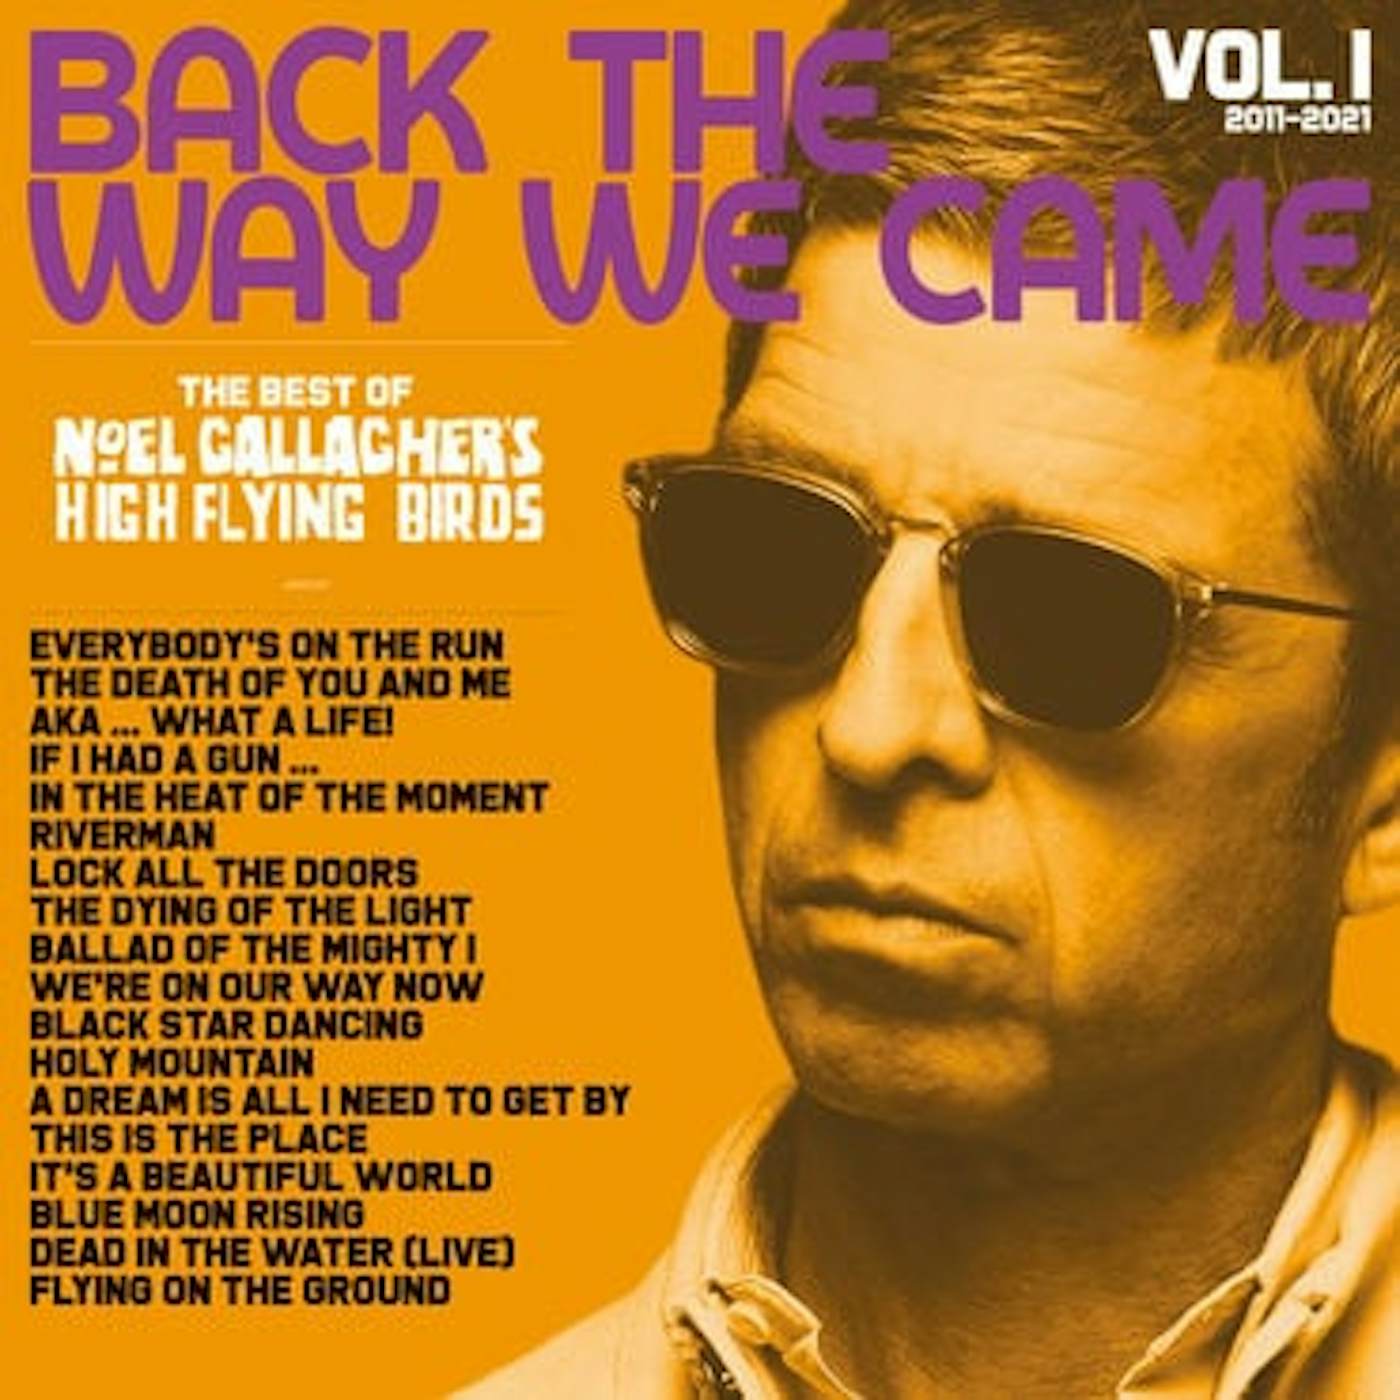 Noel Gallagher's High Flying Birds Back the Way We Came: Vol. 1 (2011 - 2021) Vinyl Record